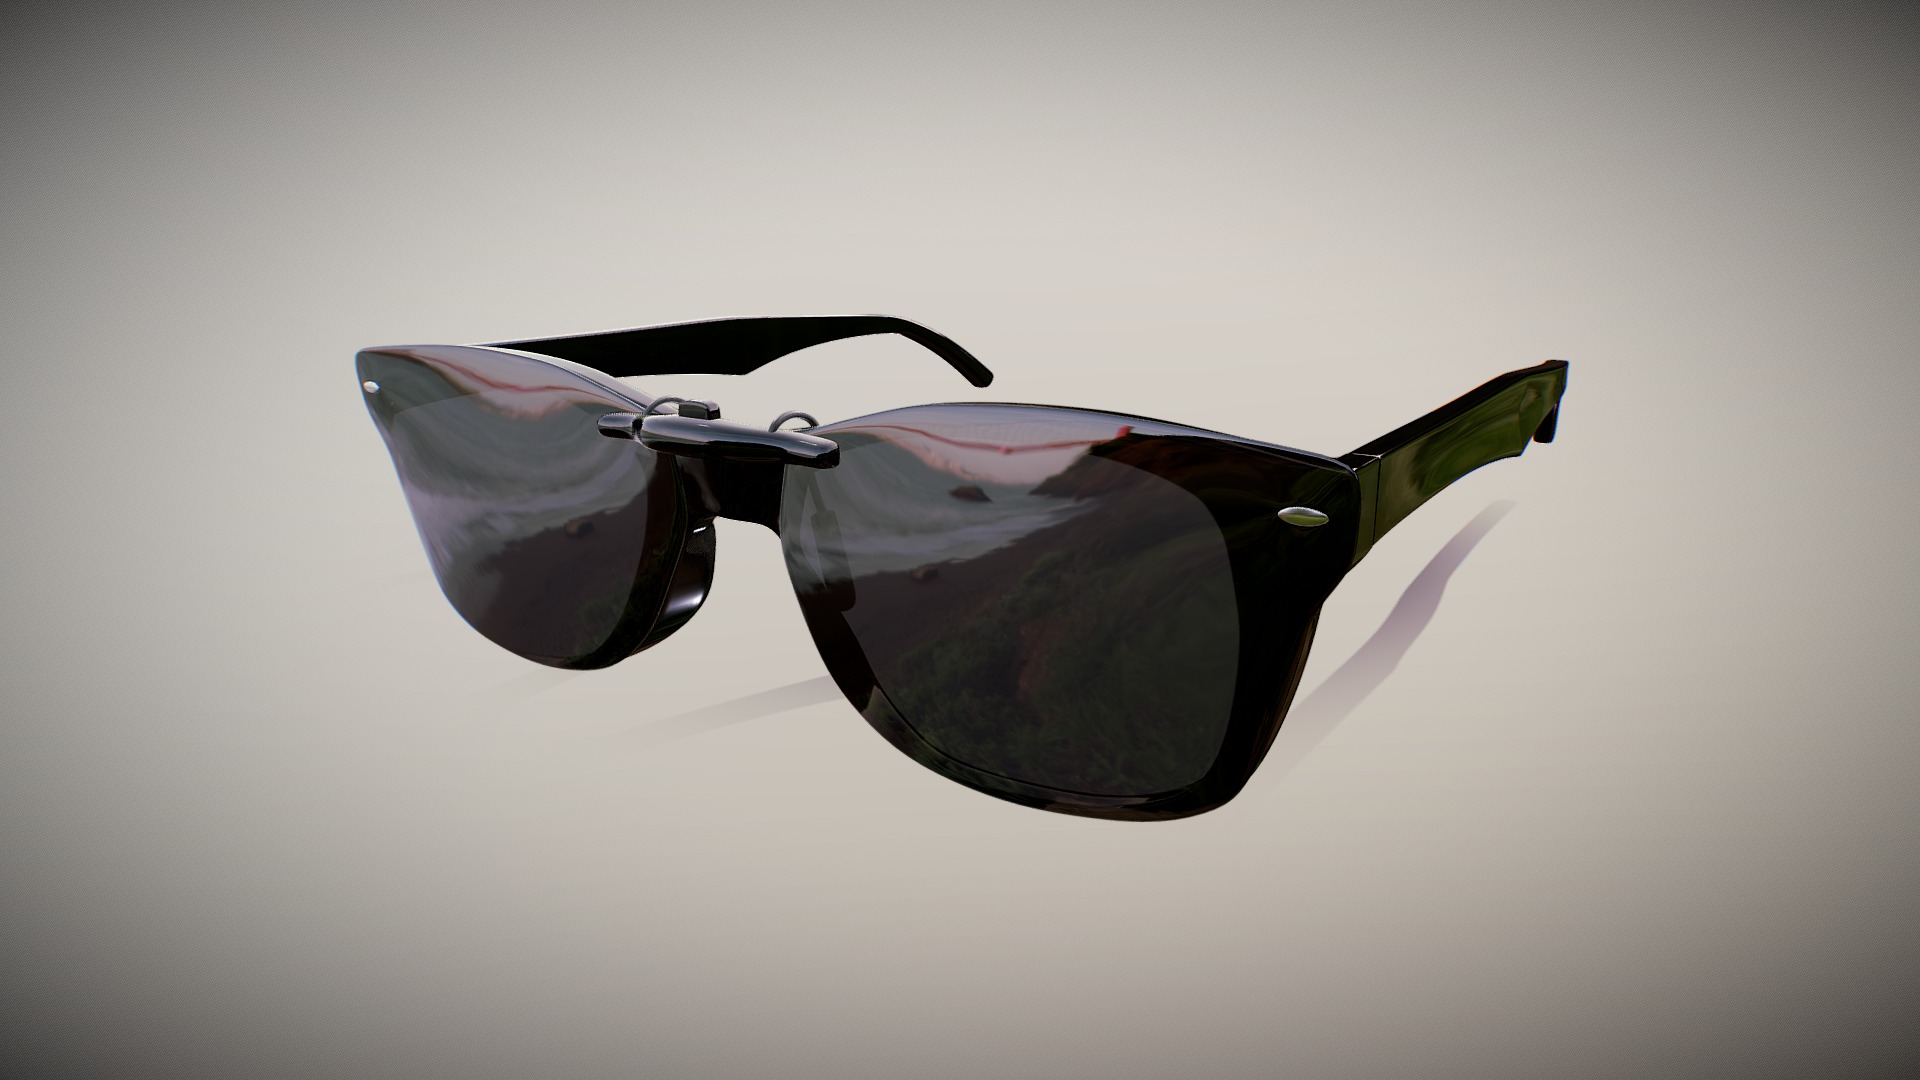 3D model Polarized Sunglasses RAY BAN - This is a 3D model of the Polarized Sunglasses RAY BAN. The 3D model is about a pair of sunglasses.